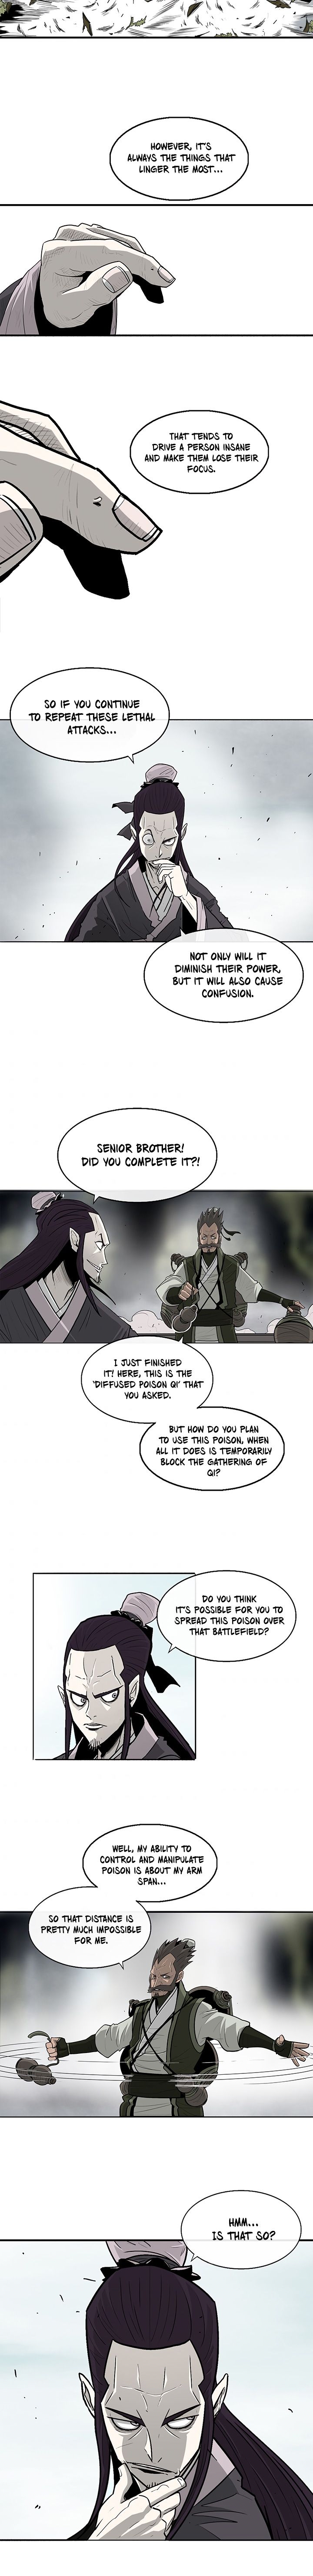 Legend of the Northern Blade chapter 64 page 7